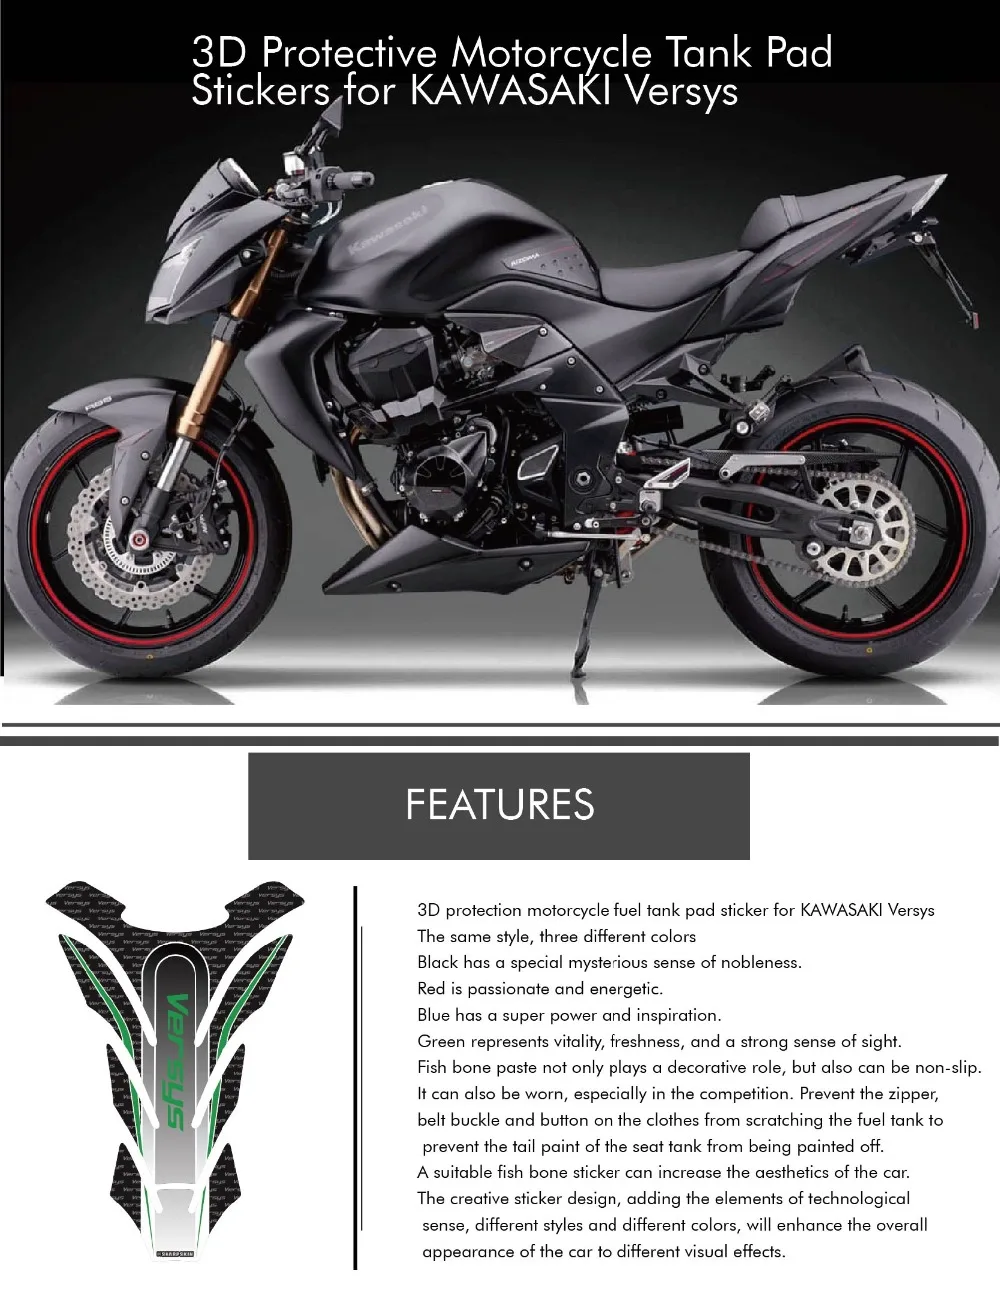 NEW Motorcycle 3D fuel tank pad sticker Fishbone protective decorative decal Fit KAWASAKI Versys 650 1000 all VERSYS